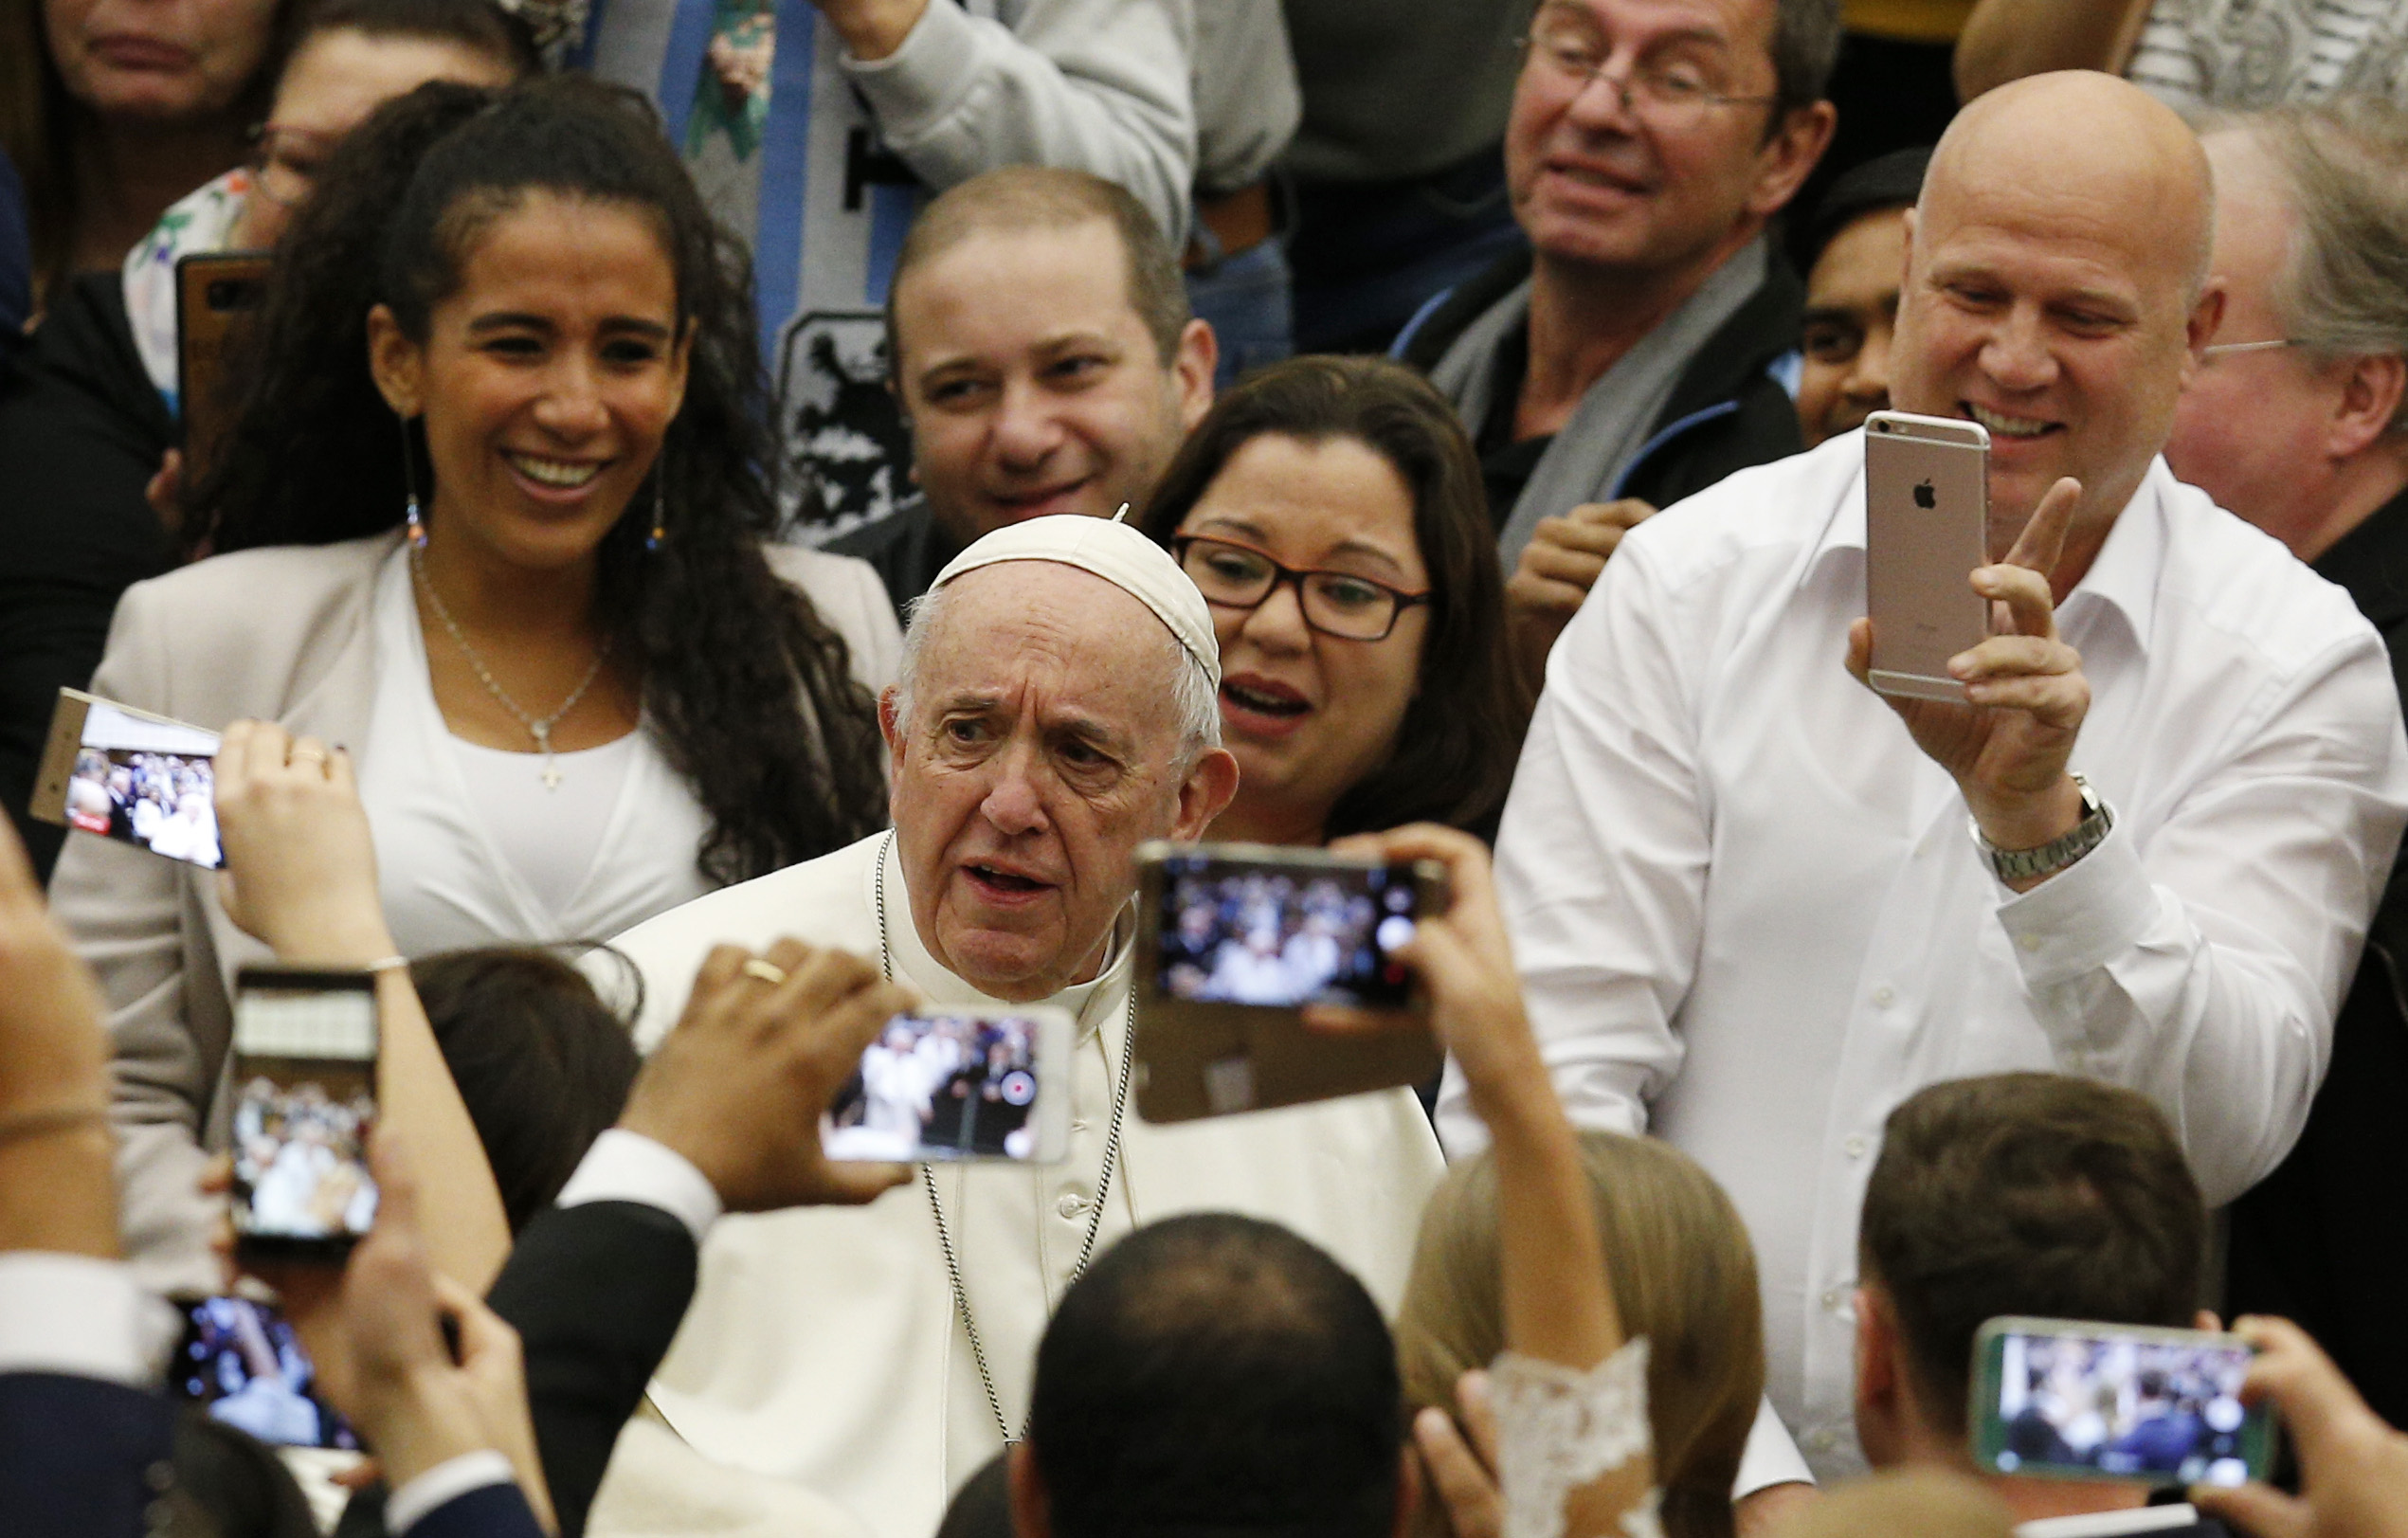 When it comes to prayer, there is no room for individualism, pope says